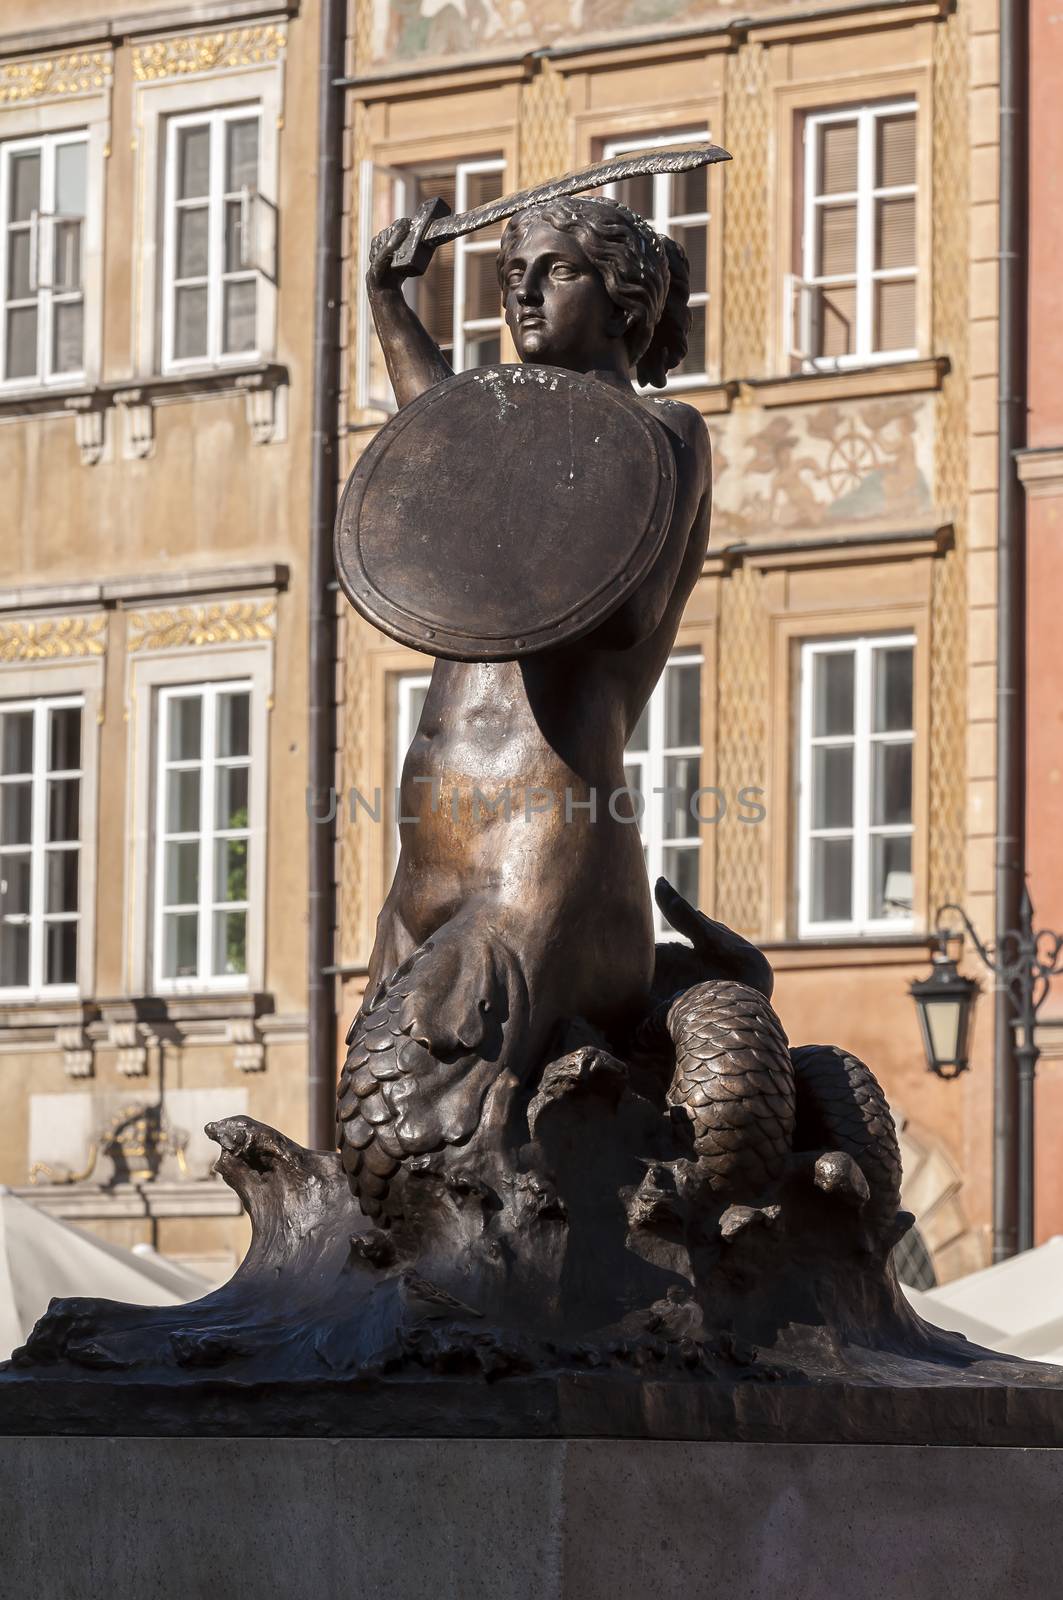 Mermaid statue in the Old Town Square of Warsaw, Poland.